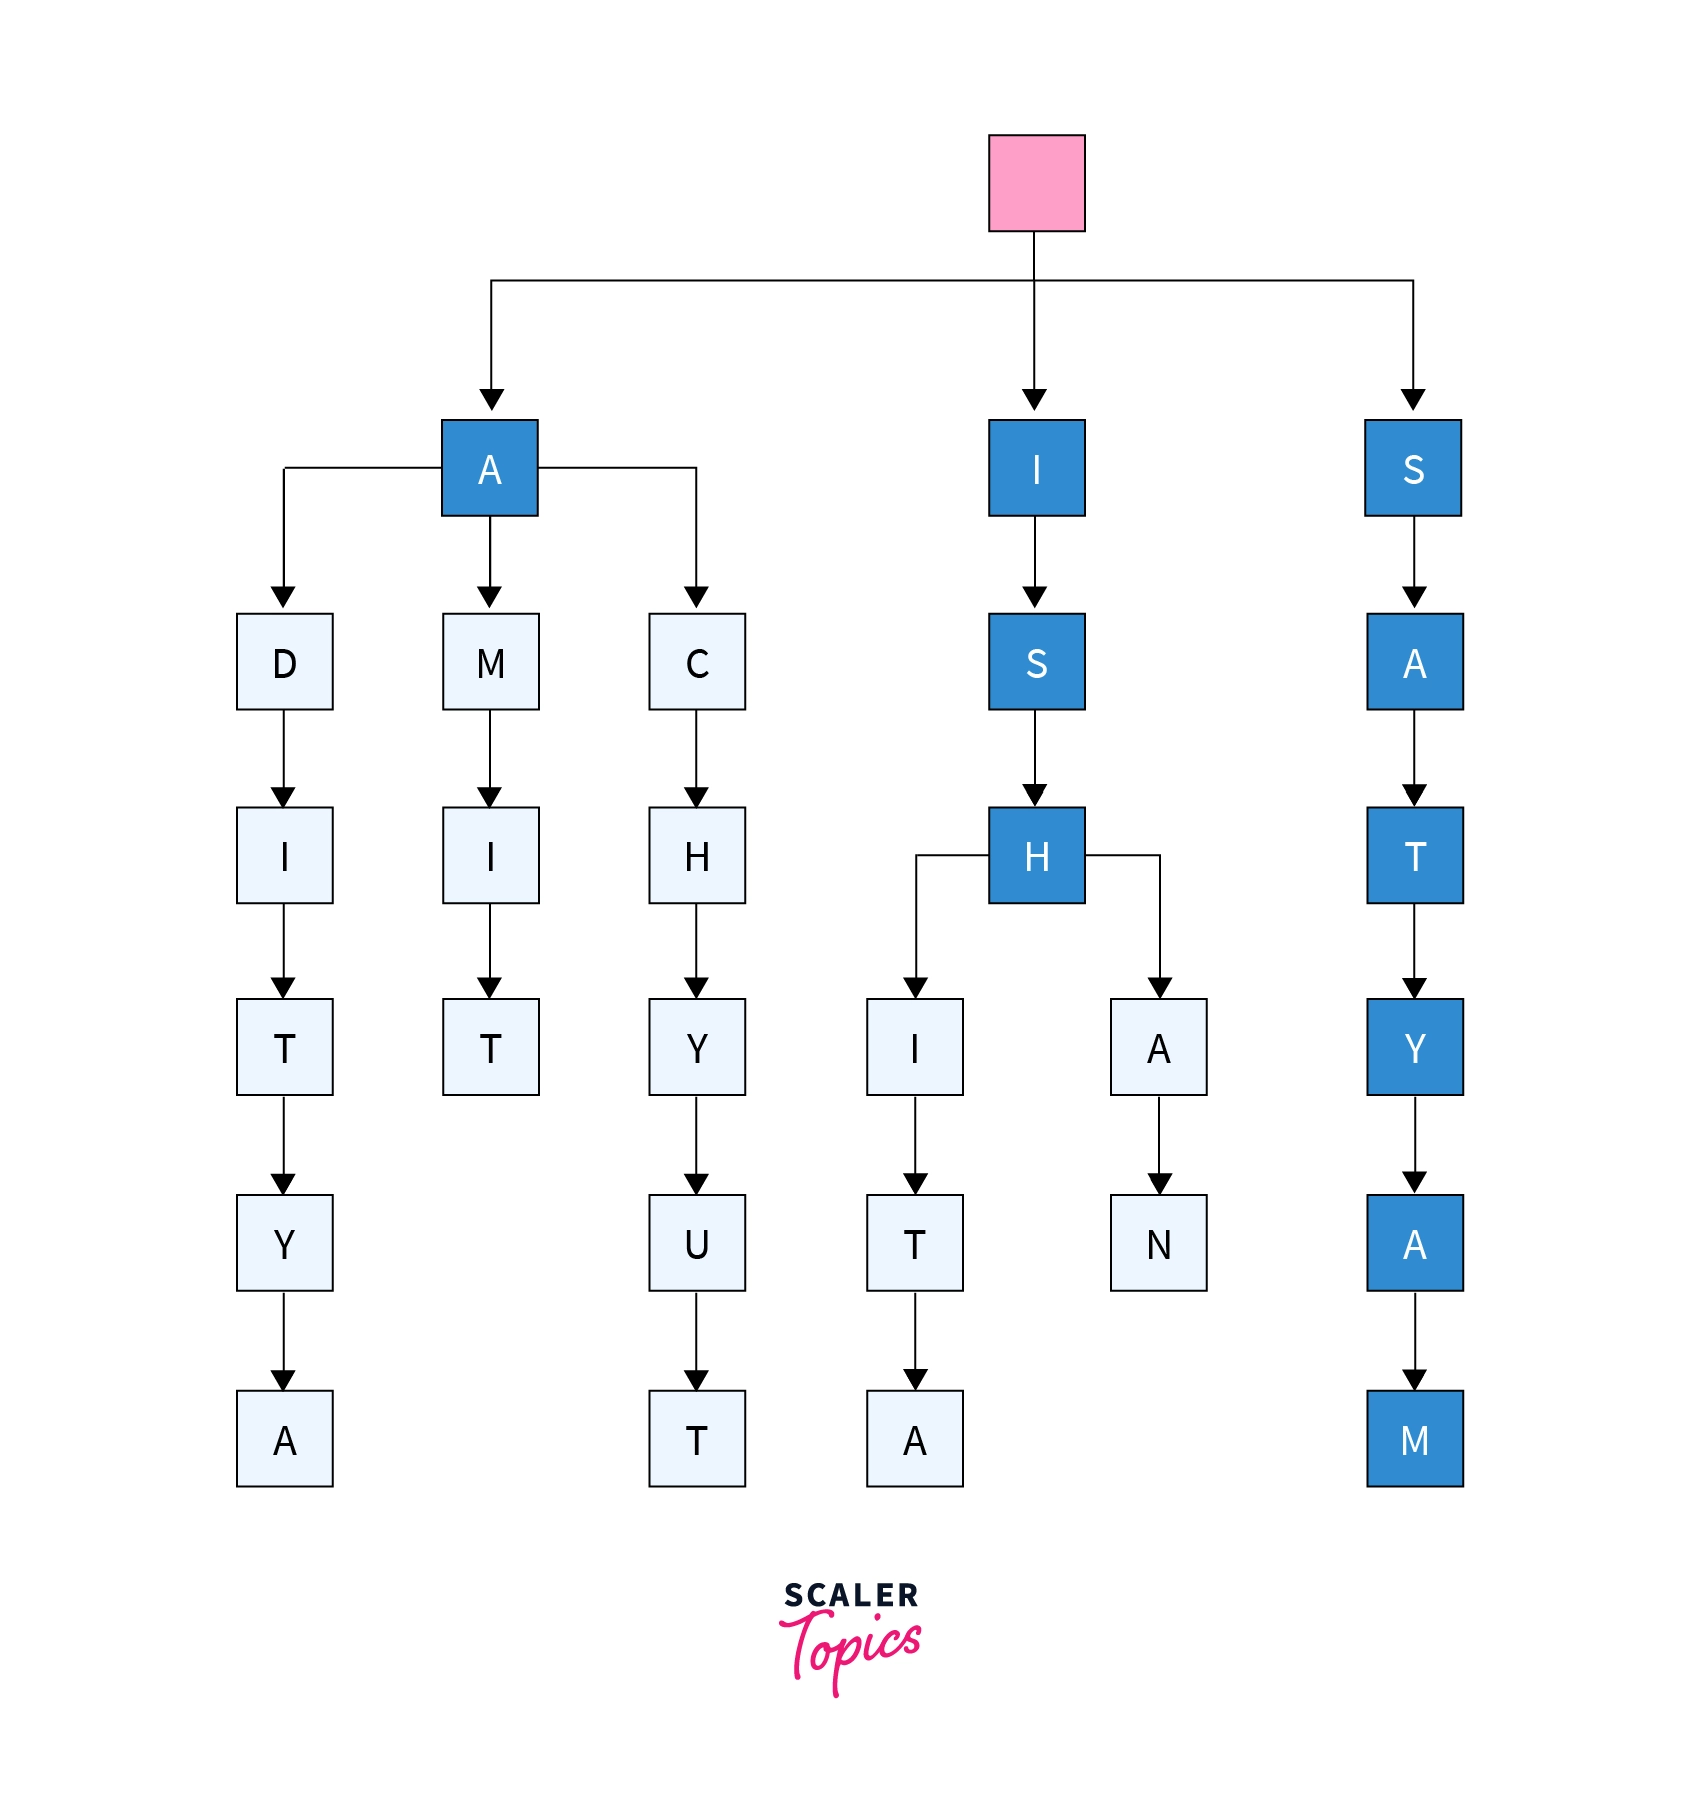 suffix tree example